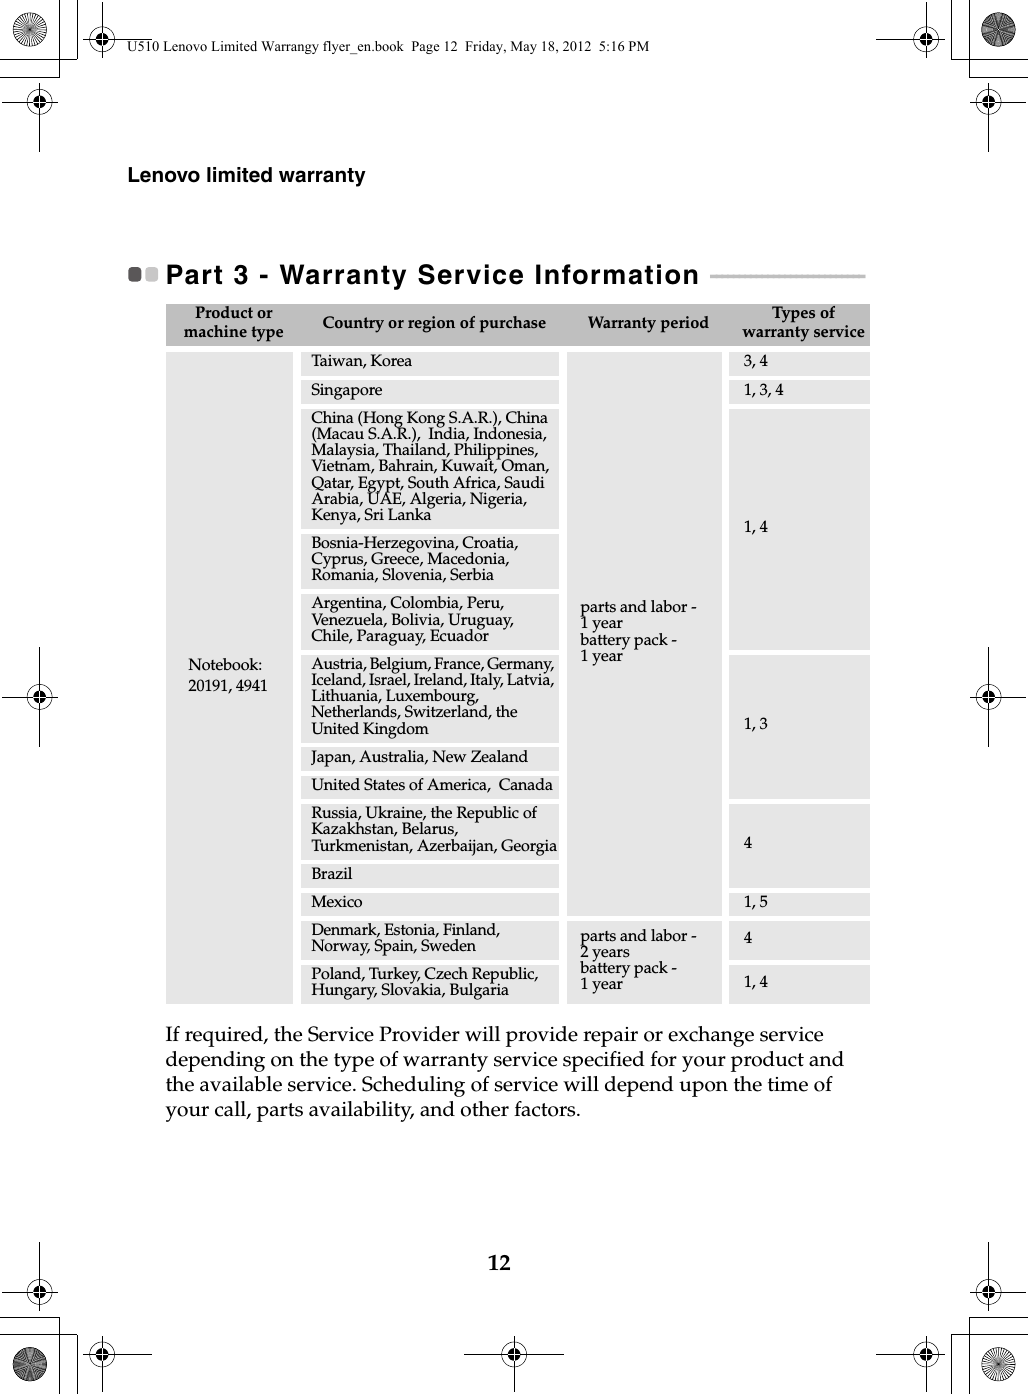 12Lenovo limited warrantyPart 3 - Warranty Service Information  - - - - - - - - - - - - - - - - - - - - - - - - - - - If required, the Service Provider will provide repair or exchange service depending on the type of warranty service specified for your product and the available service. Scheduling of service will depend upon the time of your call, parts availability, and other factors.Product or machine type Country or region of purchase Warranty period Types of warranty serviceNotebook: 20191, 4941Taiwan, Koreaparts and labor - 1 yearbattery pack - 1 year3, 4Singapore 1, 3, 4China (Hong Kong S.A.R.), China (Macau S.A.R.),  India, Indonesia, Malaysia, Thailand, Philippines, Vietnam, Bahrain, Kuwait, Oman, Qatar, Egypt, South Africa, Saudi Arabia, UAE, Algeria, Nigeria,  Kenya, Sri Lanka 1, 4Bosnia-Herzegovina, Croatia, Cyprus, Greece, Macedonia, Romania, Slovenia, SerbiaArgentina, Colombia, Peru, Venezuela, Bolivia, Uruguay, Chile, Paraguay, EcuadorAustria, Belgium, France, Germany, Iceland, Israel, Ireland, Italy, Latvia, Lithuania, Luxembourg, Netherlands, Switzerland, the United Kingdom1, 3Japan, Australia, New ZealandUnited States of America,  CanadaRussia, Ukraine, the Republic of Kazakhstan, Belarus, Turkmenistan, Azerbaijan, Georgia 4BrazilMexico 1, 5Denmark, Estonia, Finland, Norway, Spain, Swedenparts and labor - 2 yearsbattery pack - 1 year4Poland, Turkey, Czech Republic, Hungary, Slovakia, Bulgaria 1, 4U510 Lenovo Limited Warrangy flyer_en.book  Page 12  Friday, May 18, 2012  5:16 PM